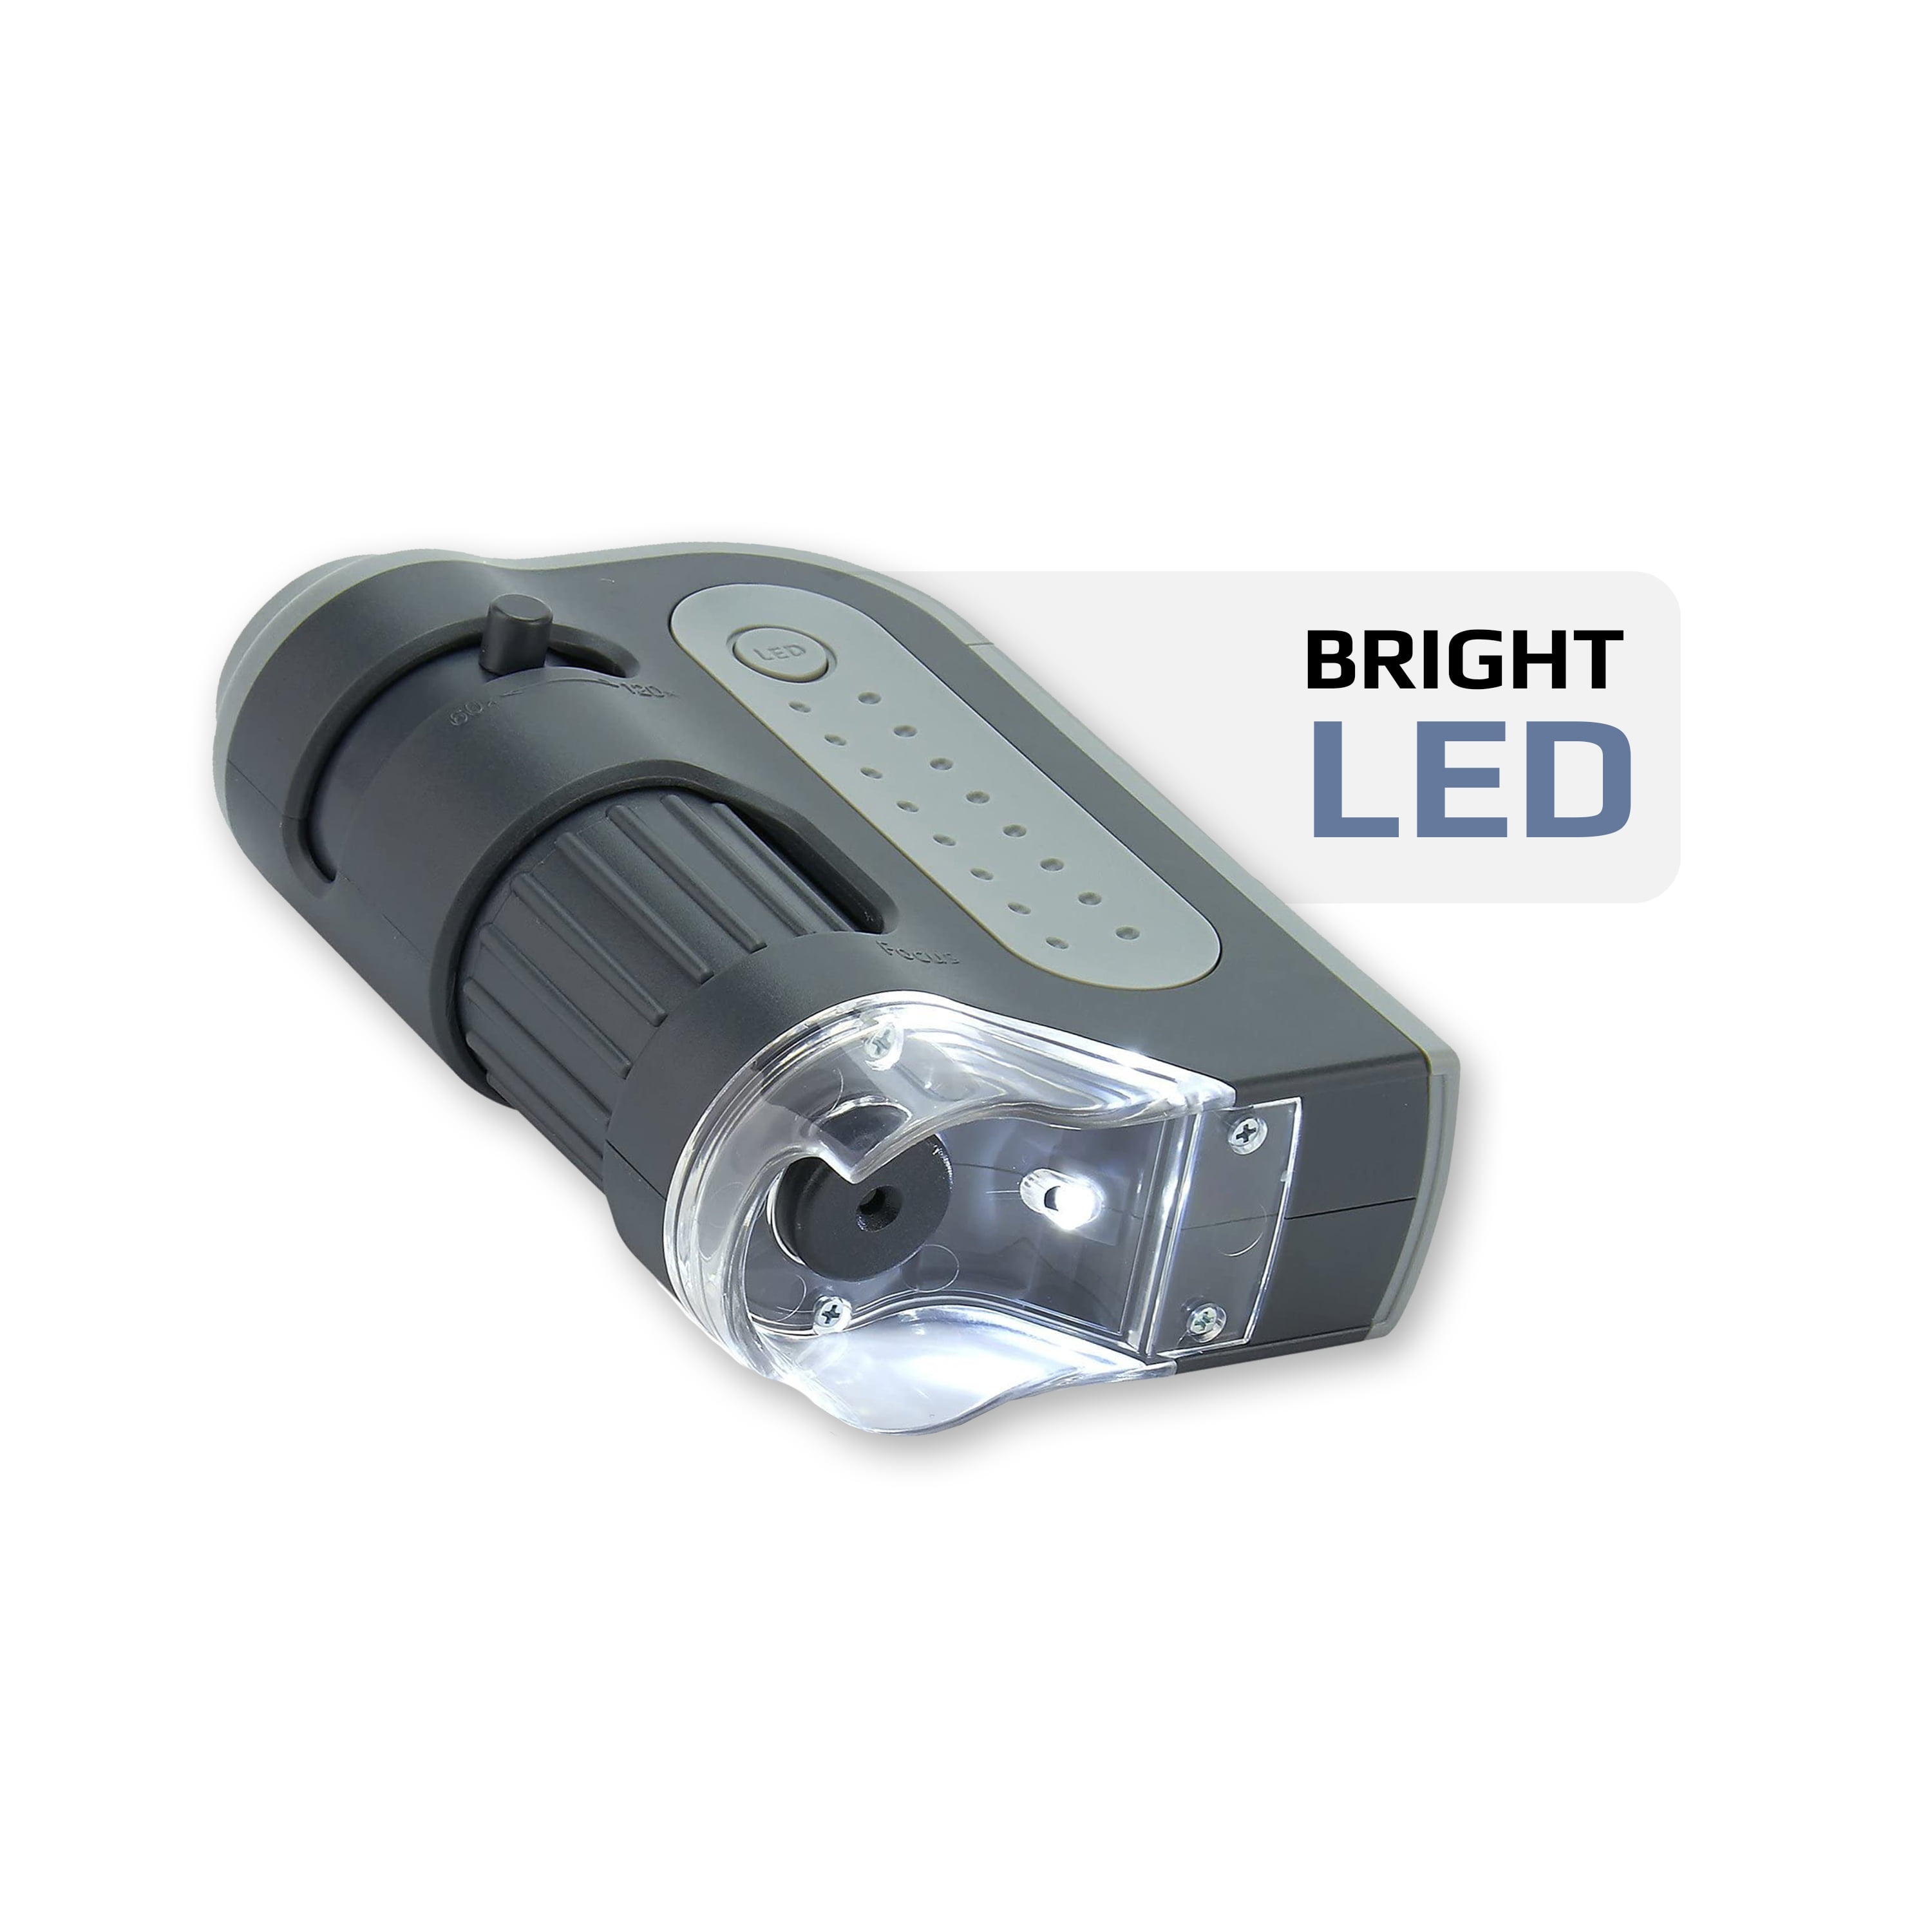 MicroBrite Plus 60x-120x LED Lighted Zoom Pocket Microscope with Aspheric Lens System 